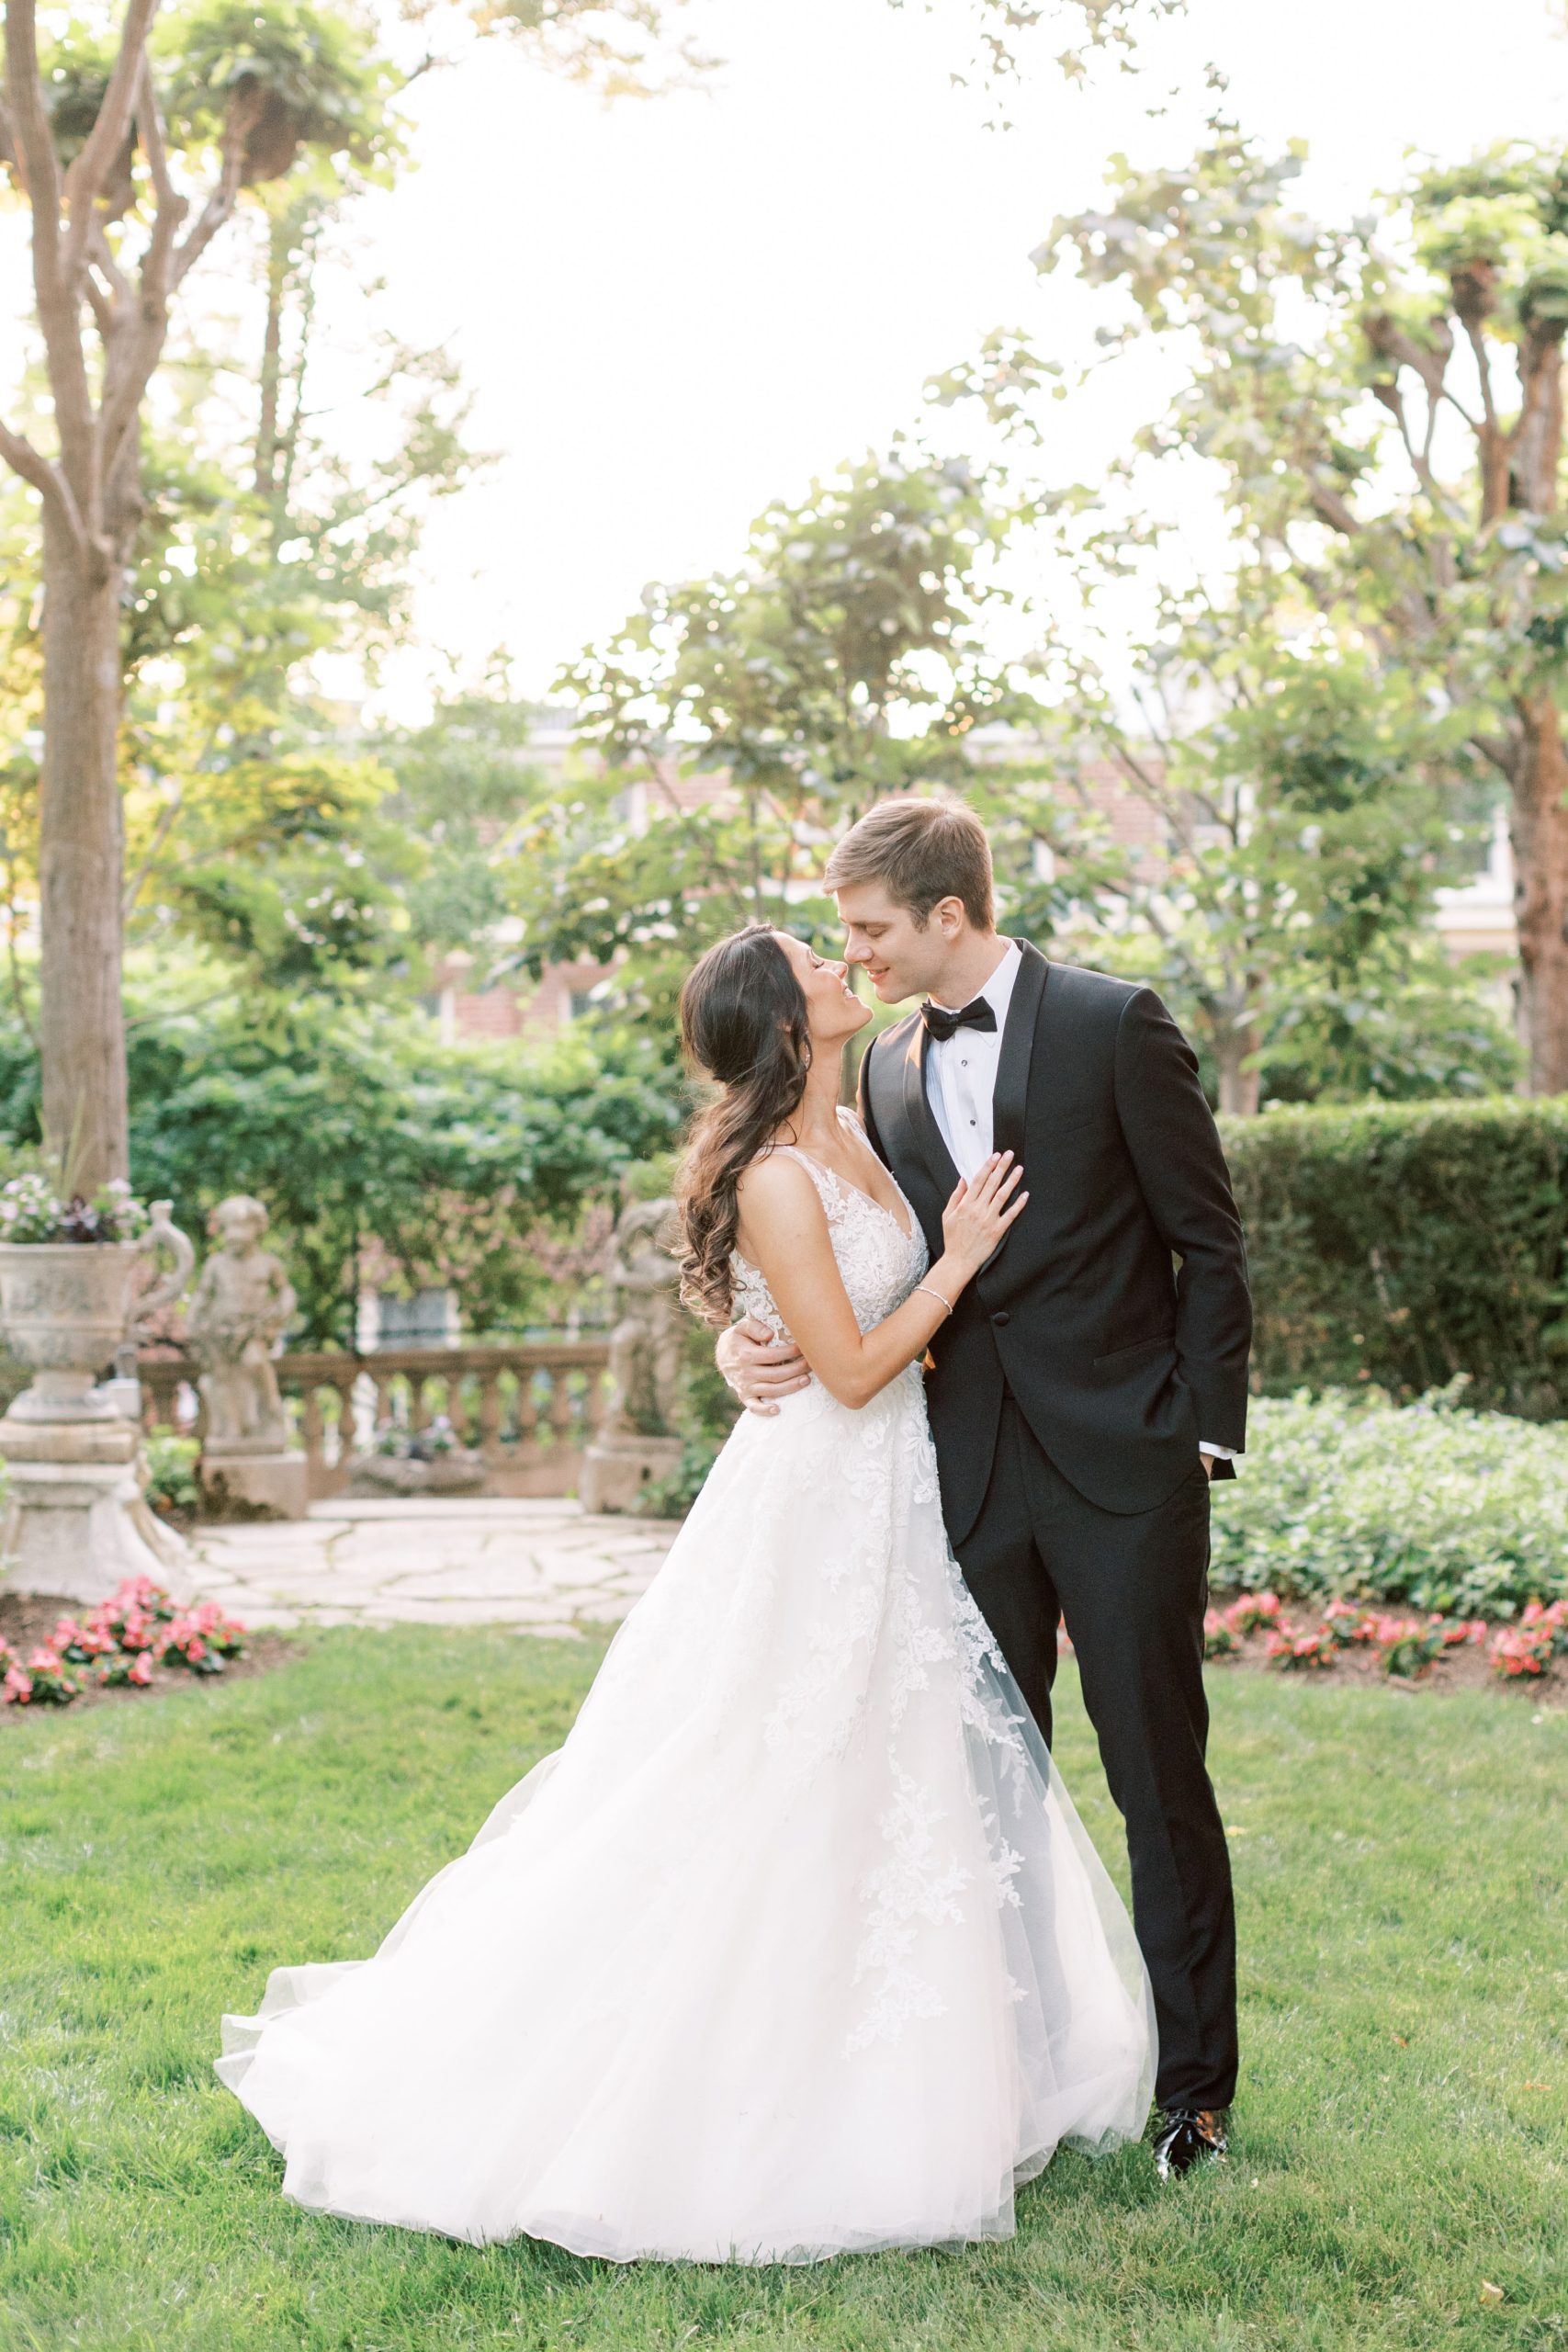 Couples Portraits at a Meridian House wedding in Washington, DC